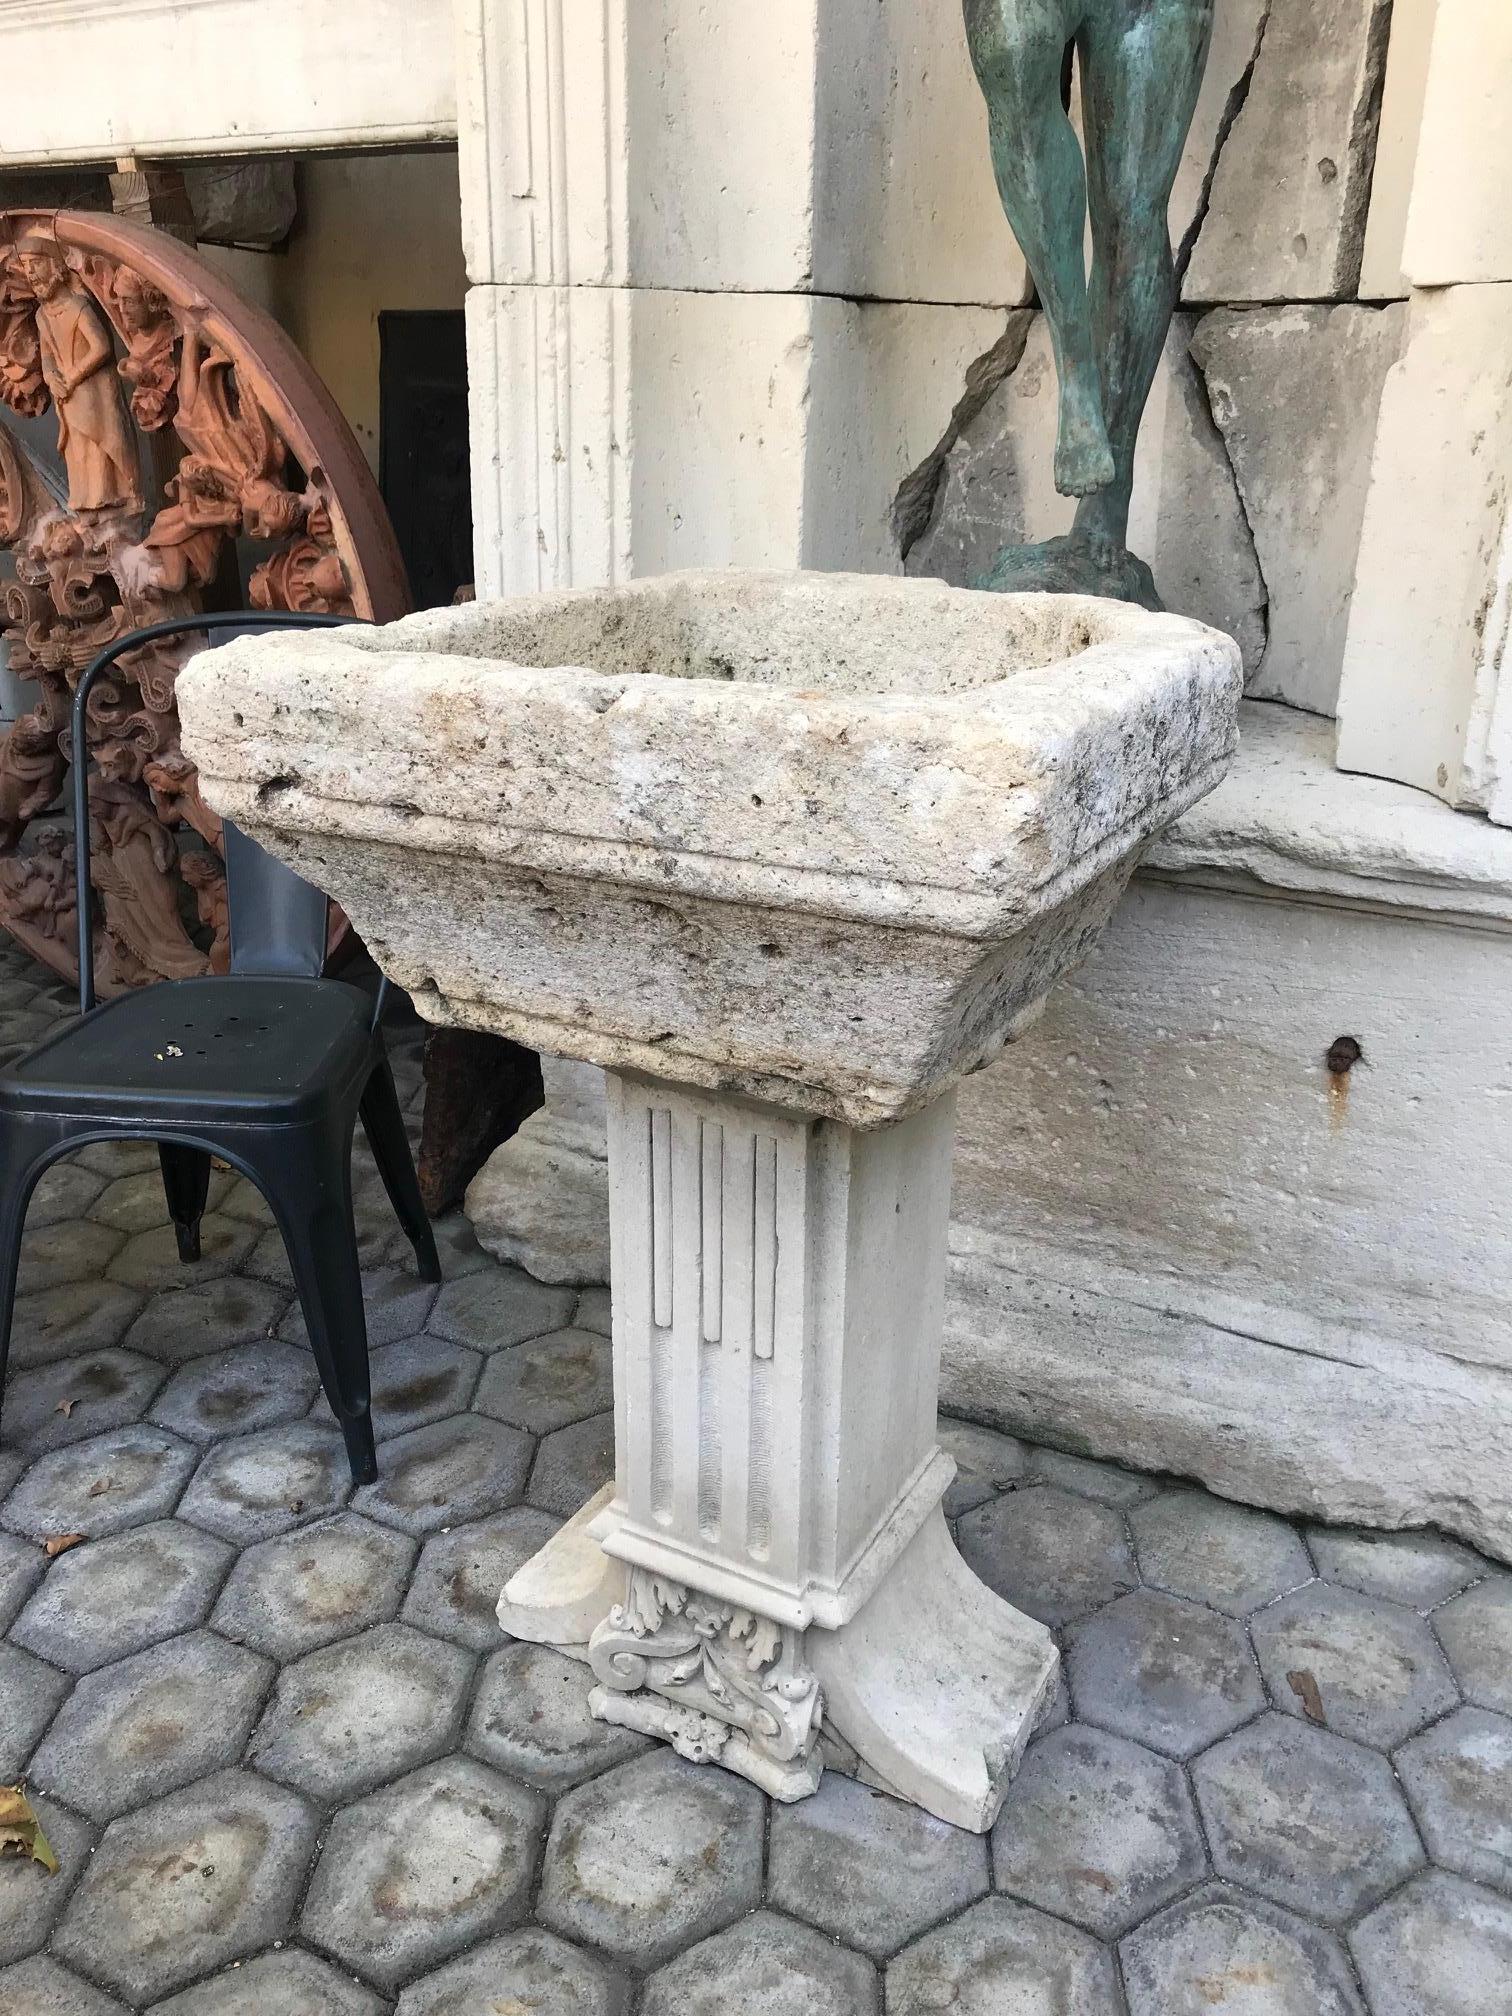 French Hand Carved Stone Container Basin on Pedestal Base Birdbath Sink Antiques focal